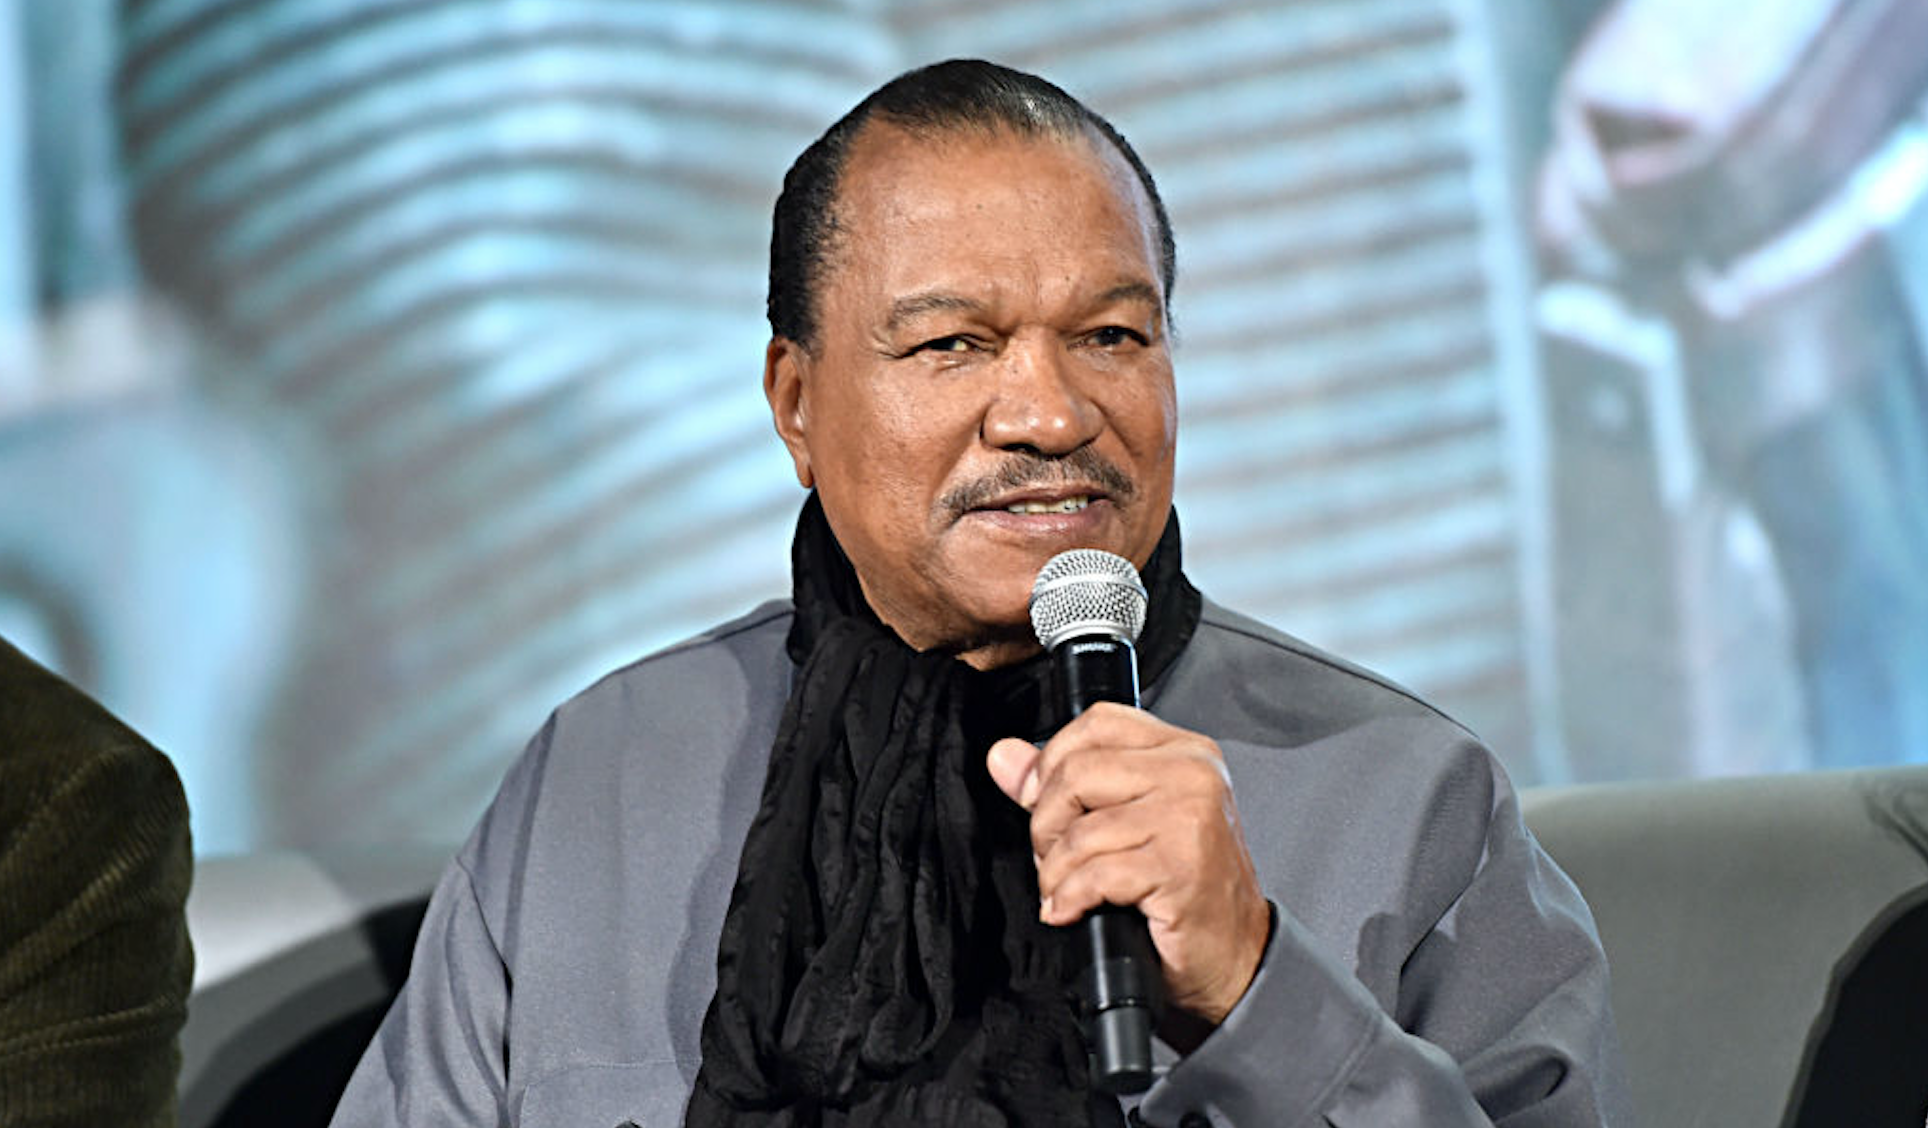 Billy Dee Williams from ‘Star Wars’ suggests actors should have the freedom to wear blackface